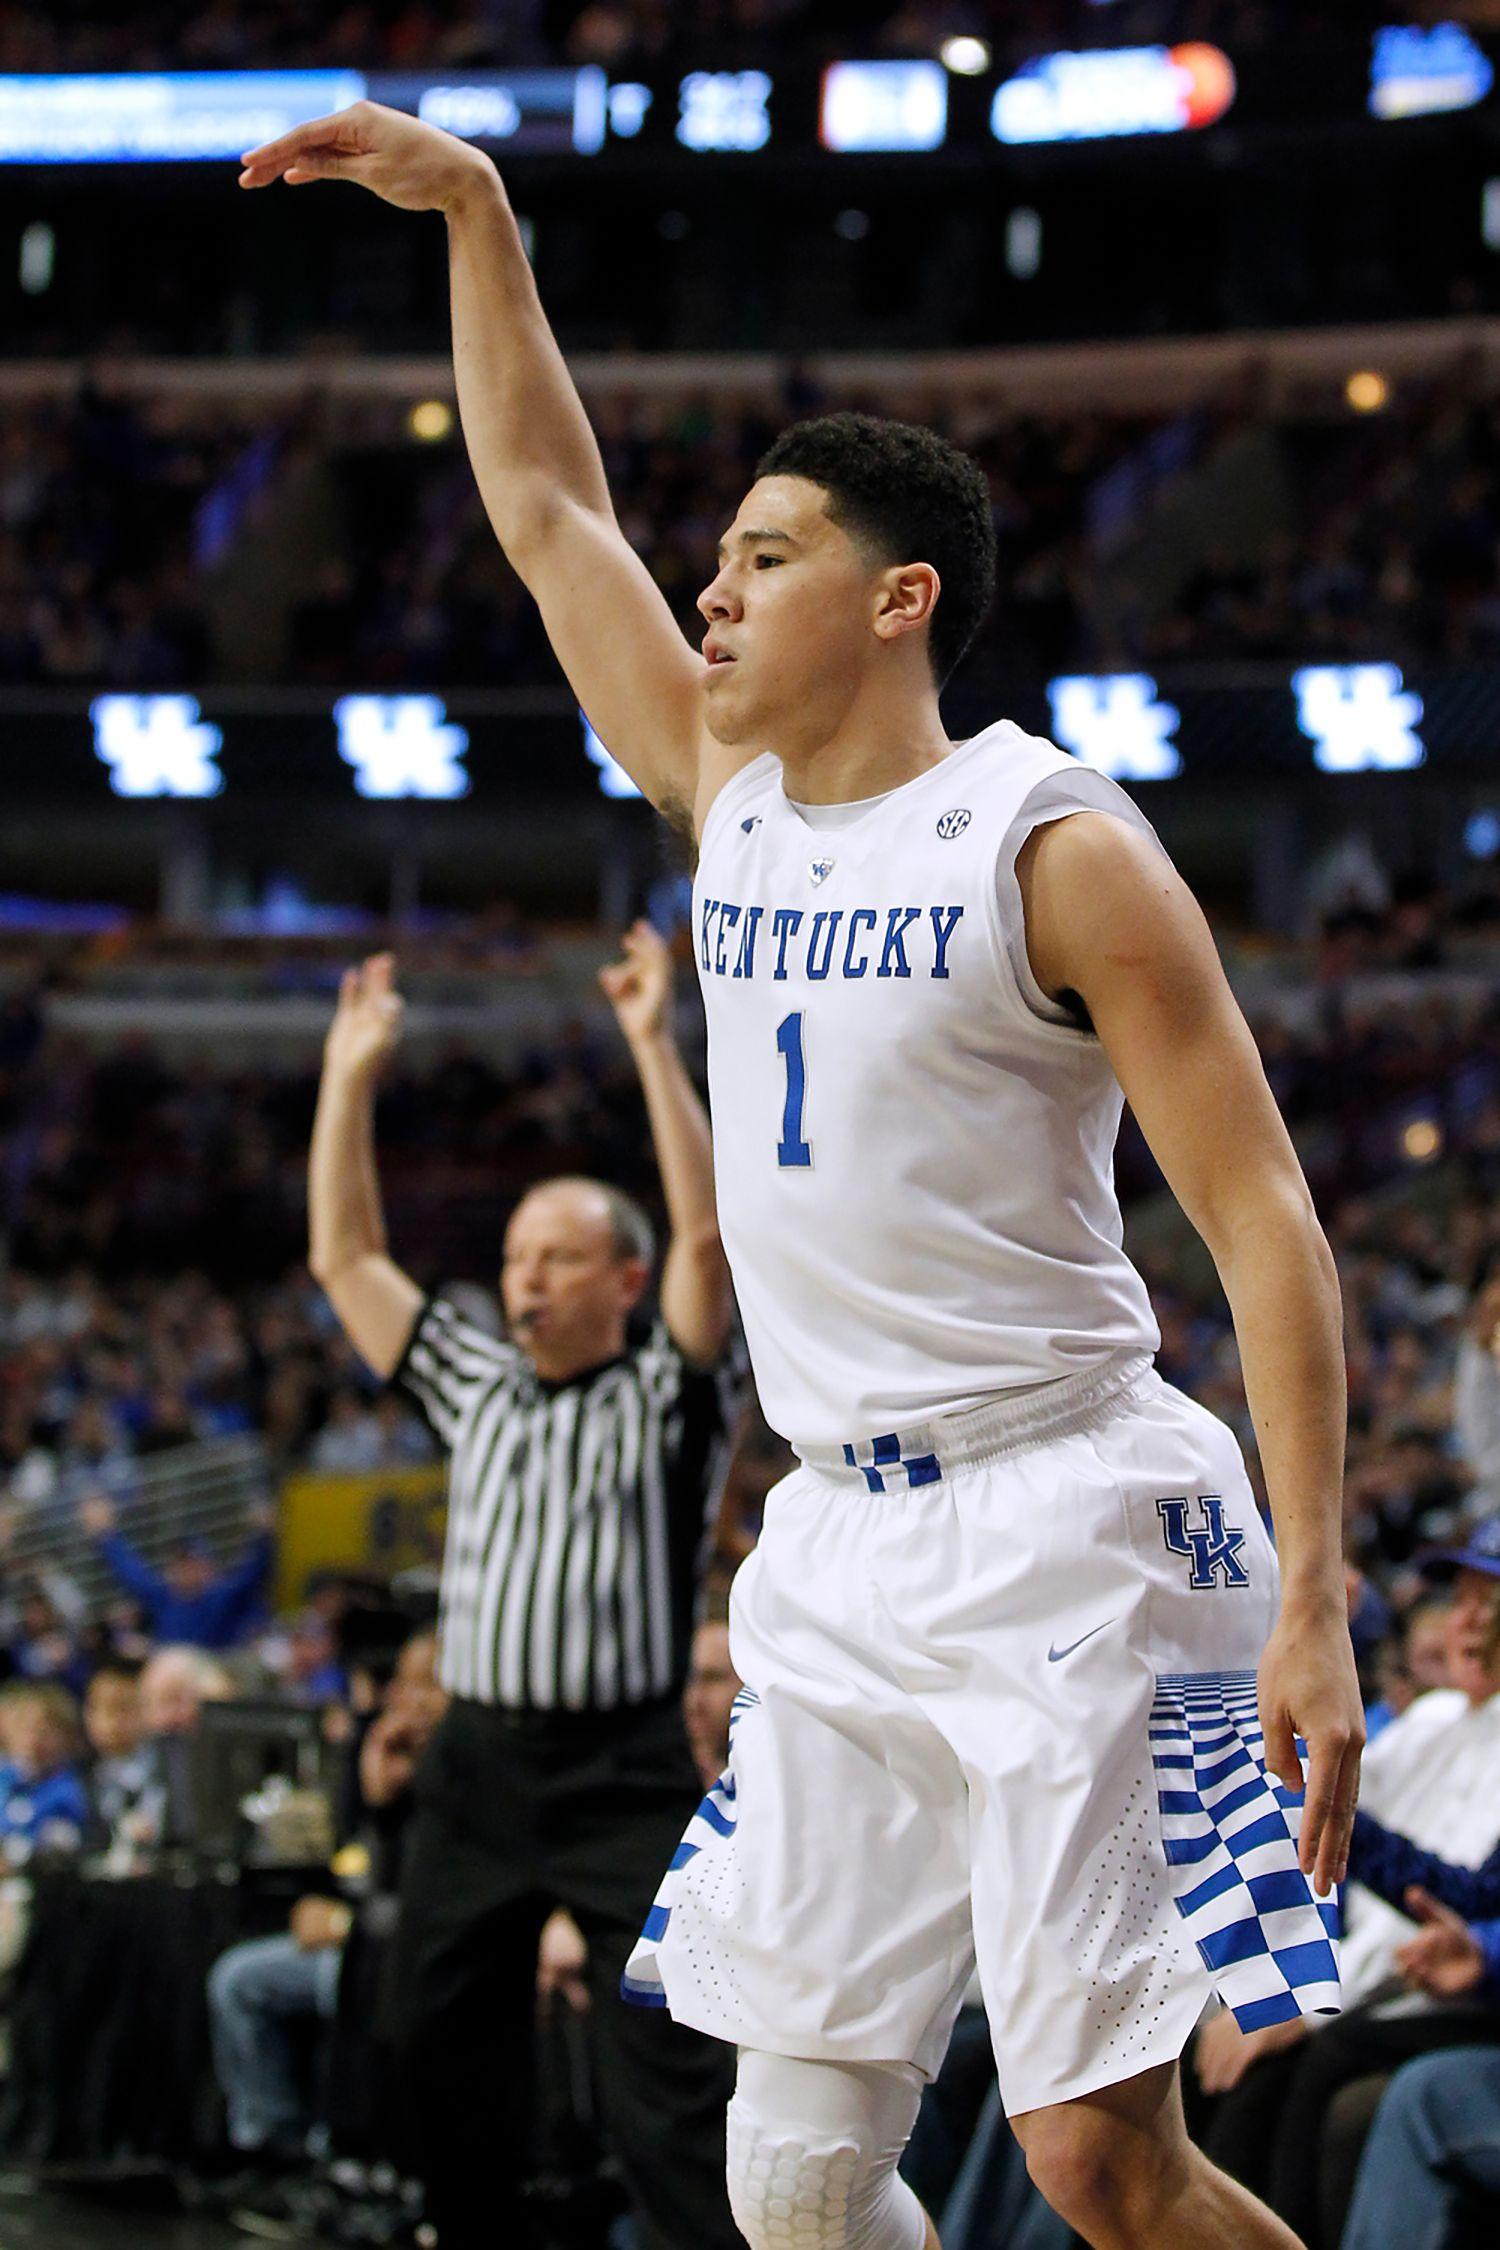 Post Draft Q&A With Devin Booker